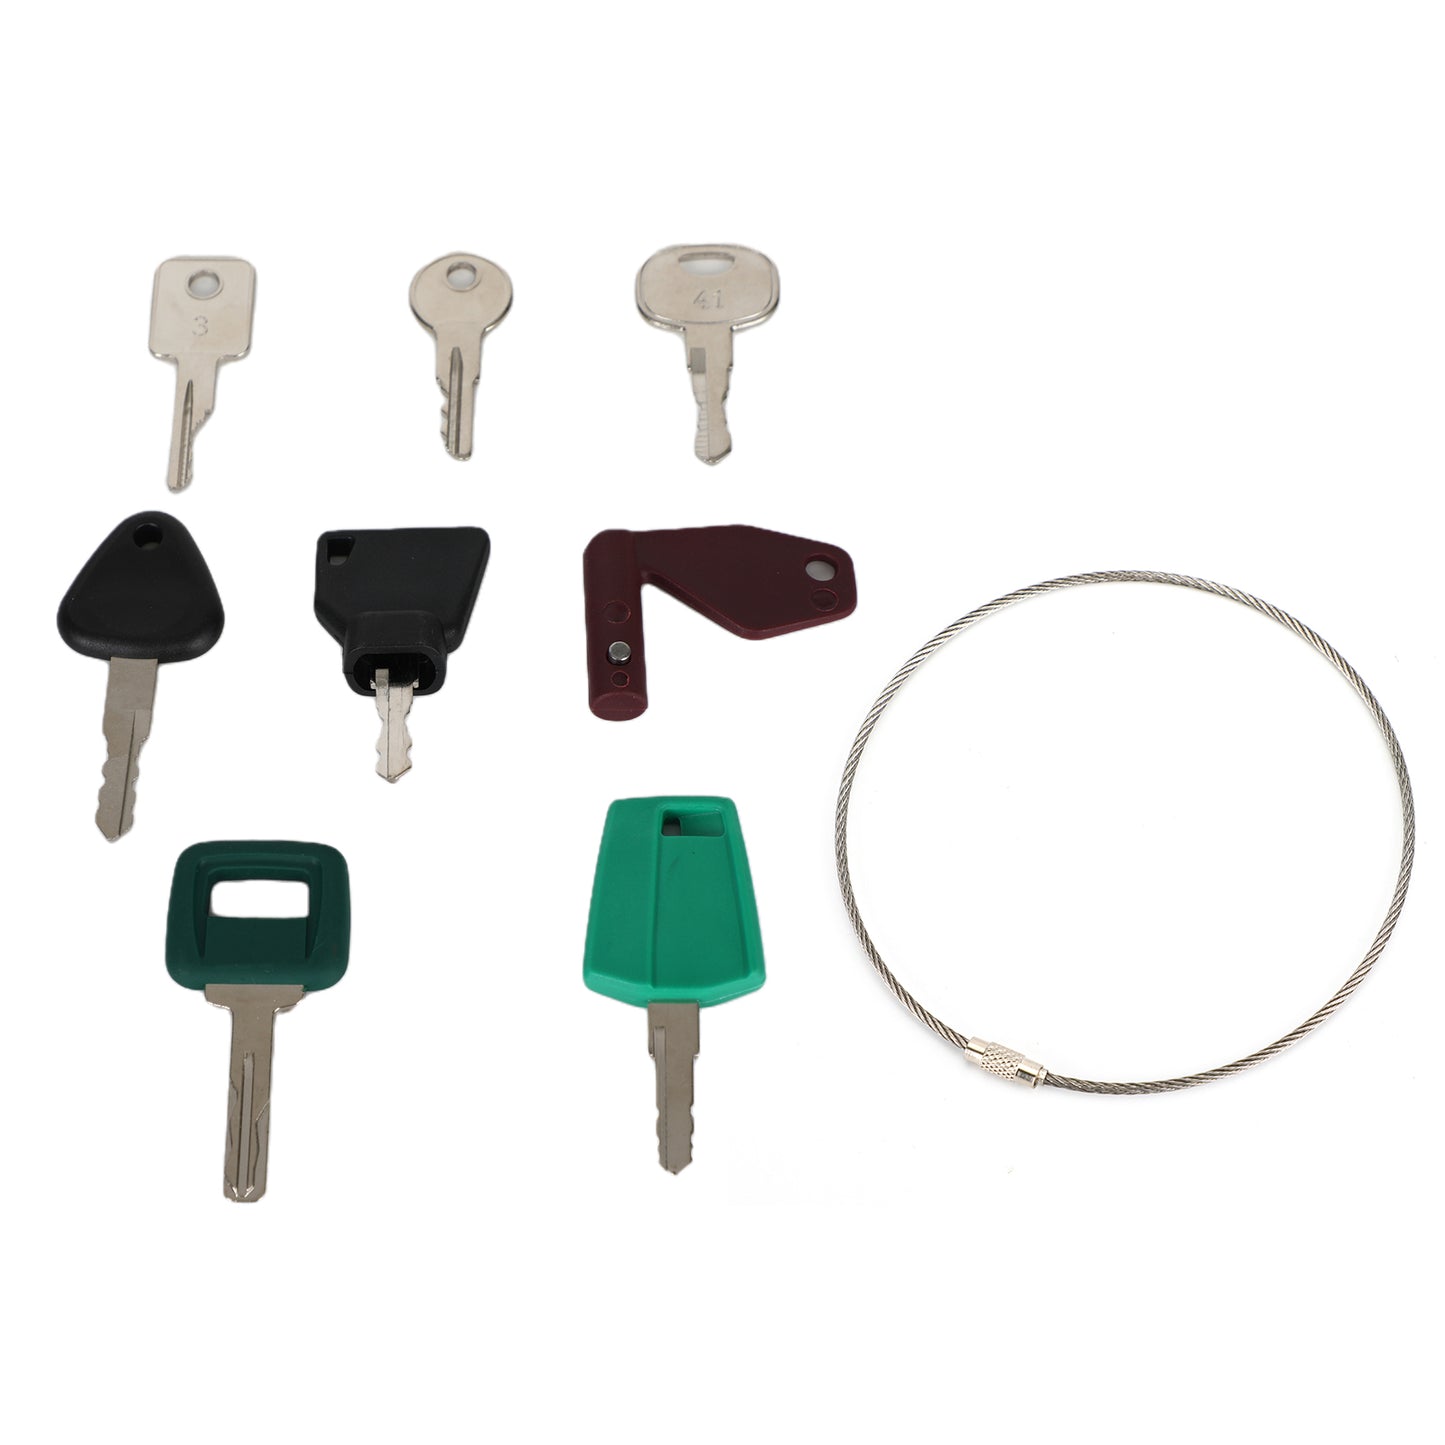 For Volvo Heavy Construction Equipment Ignition 8 Keys Set With Laser Cut Key